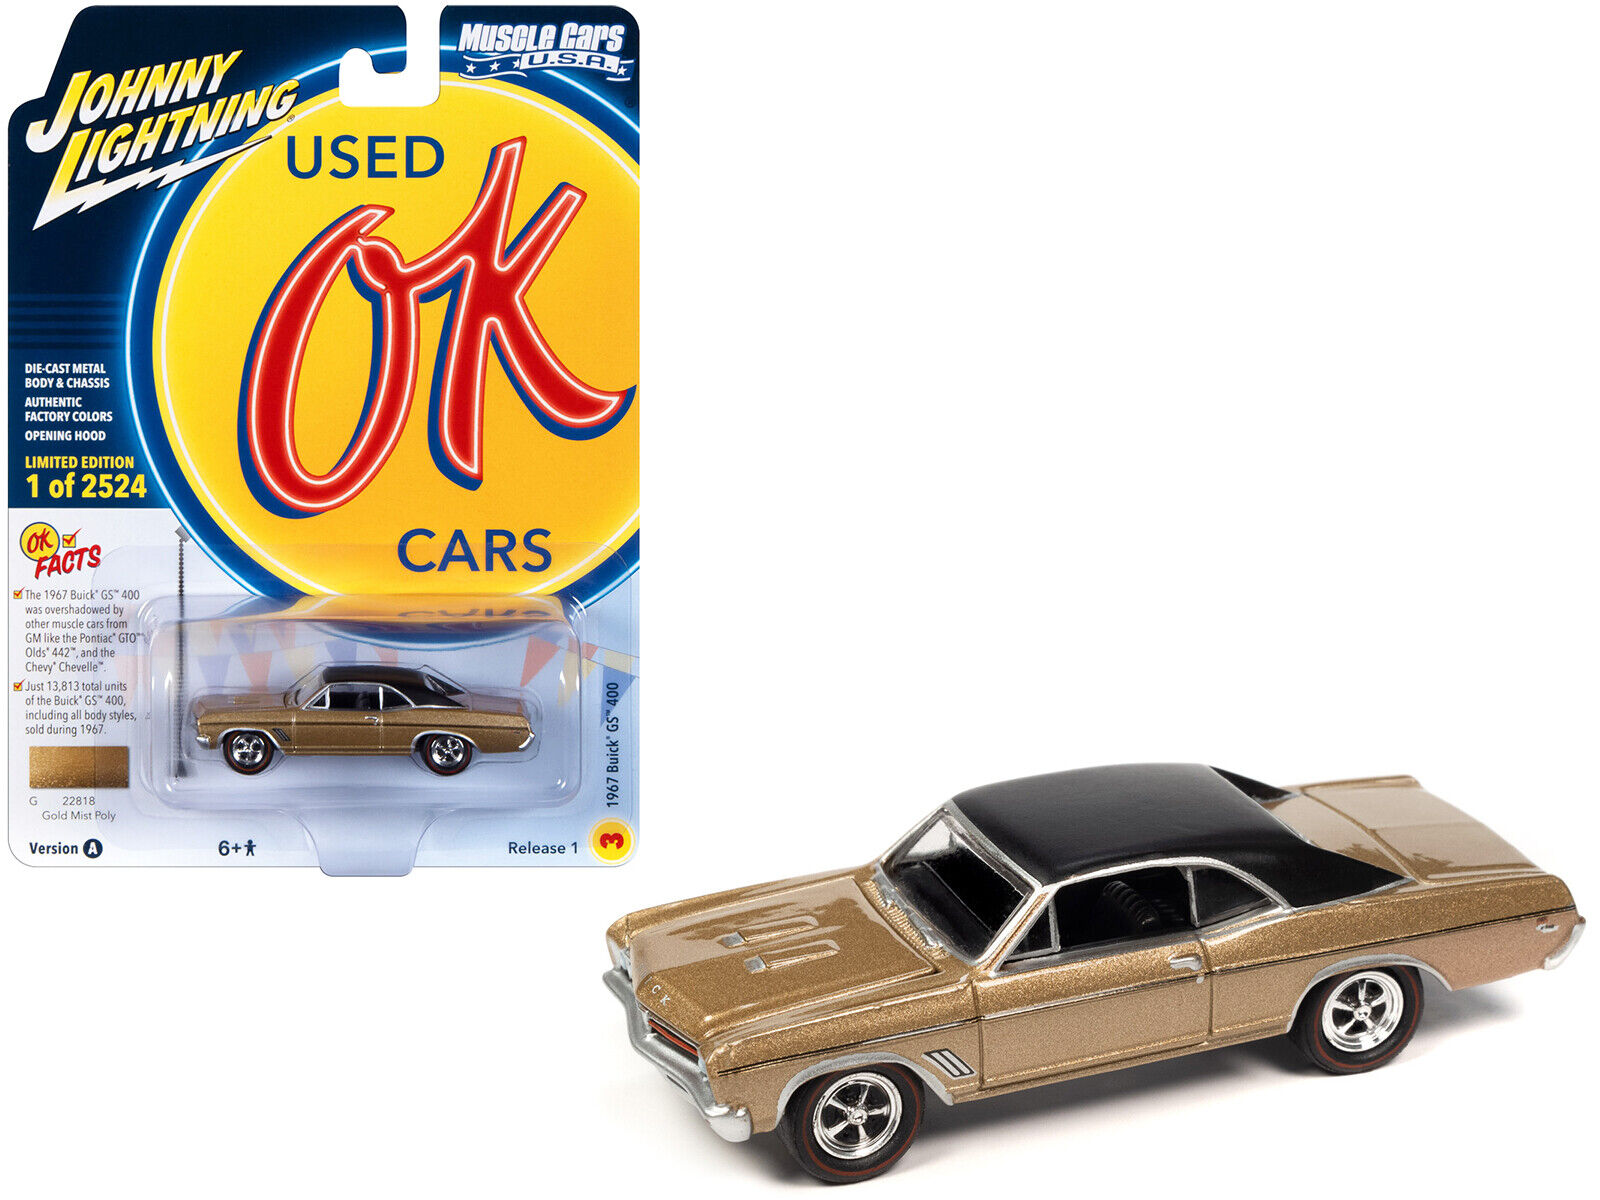 1967 Buick GS 400 Gold Mist Metallic with Matt Black Top Limited Edition to 2524